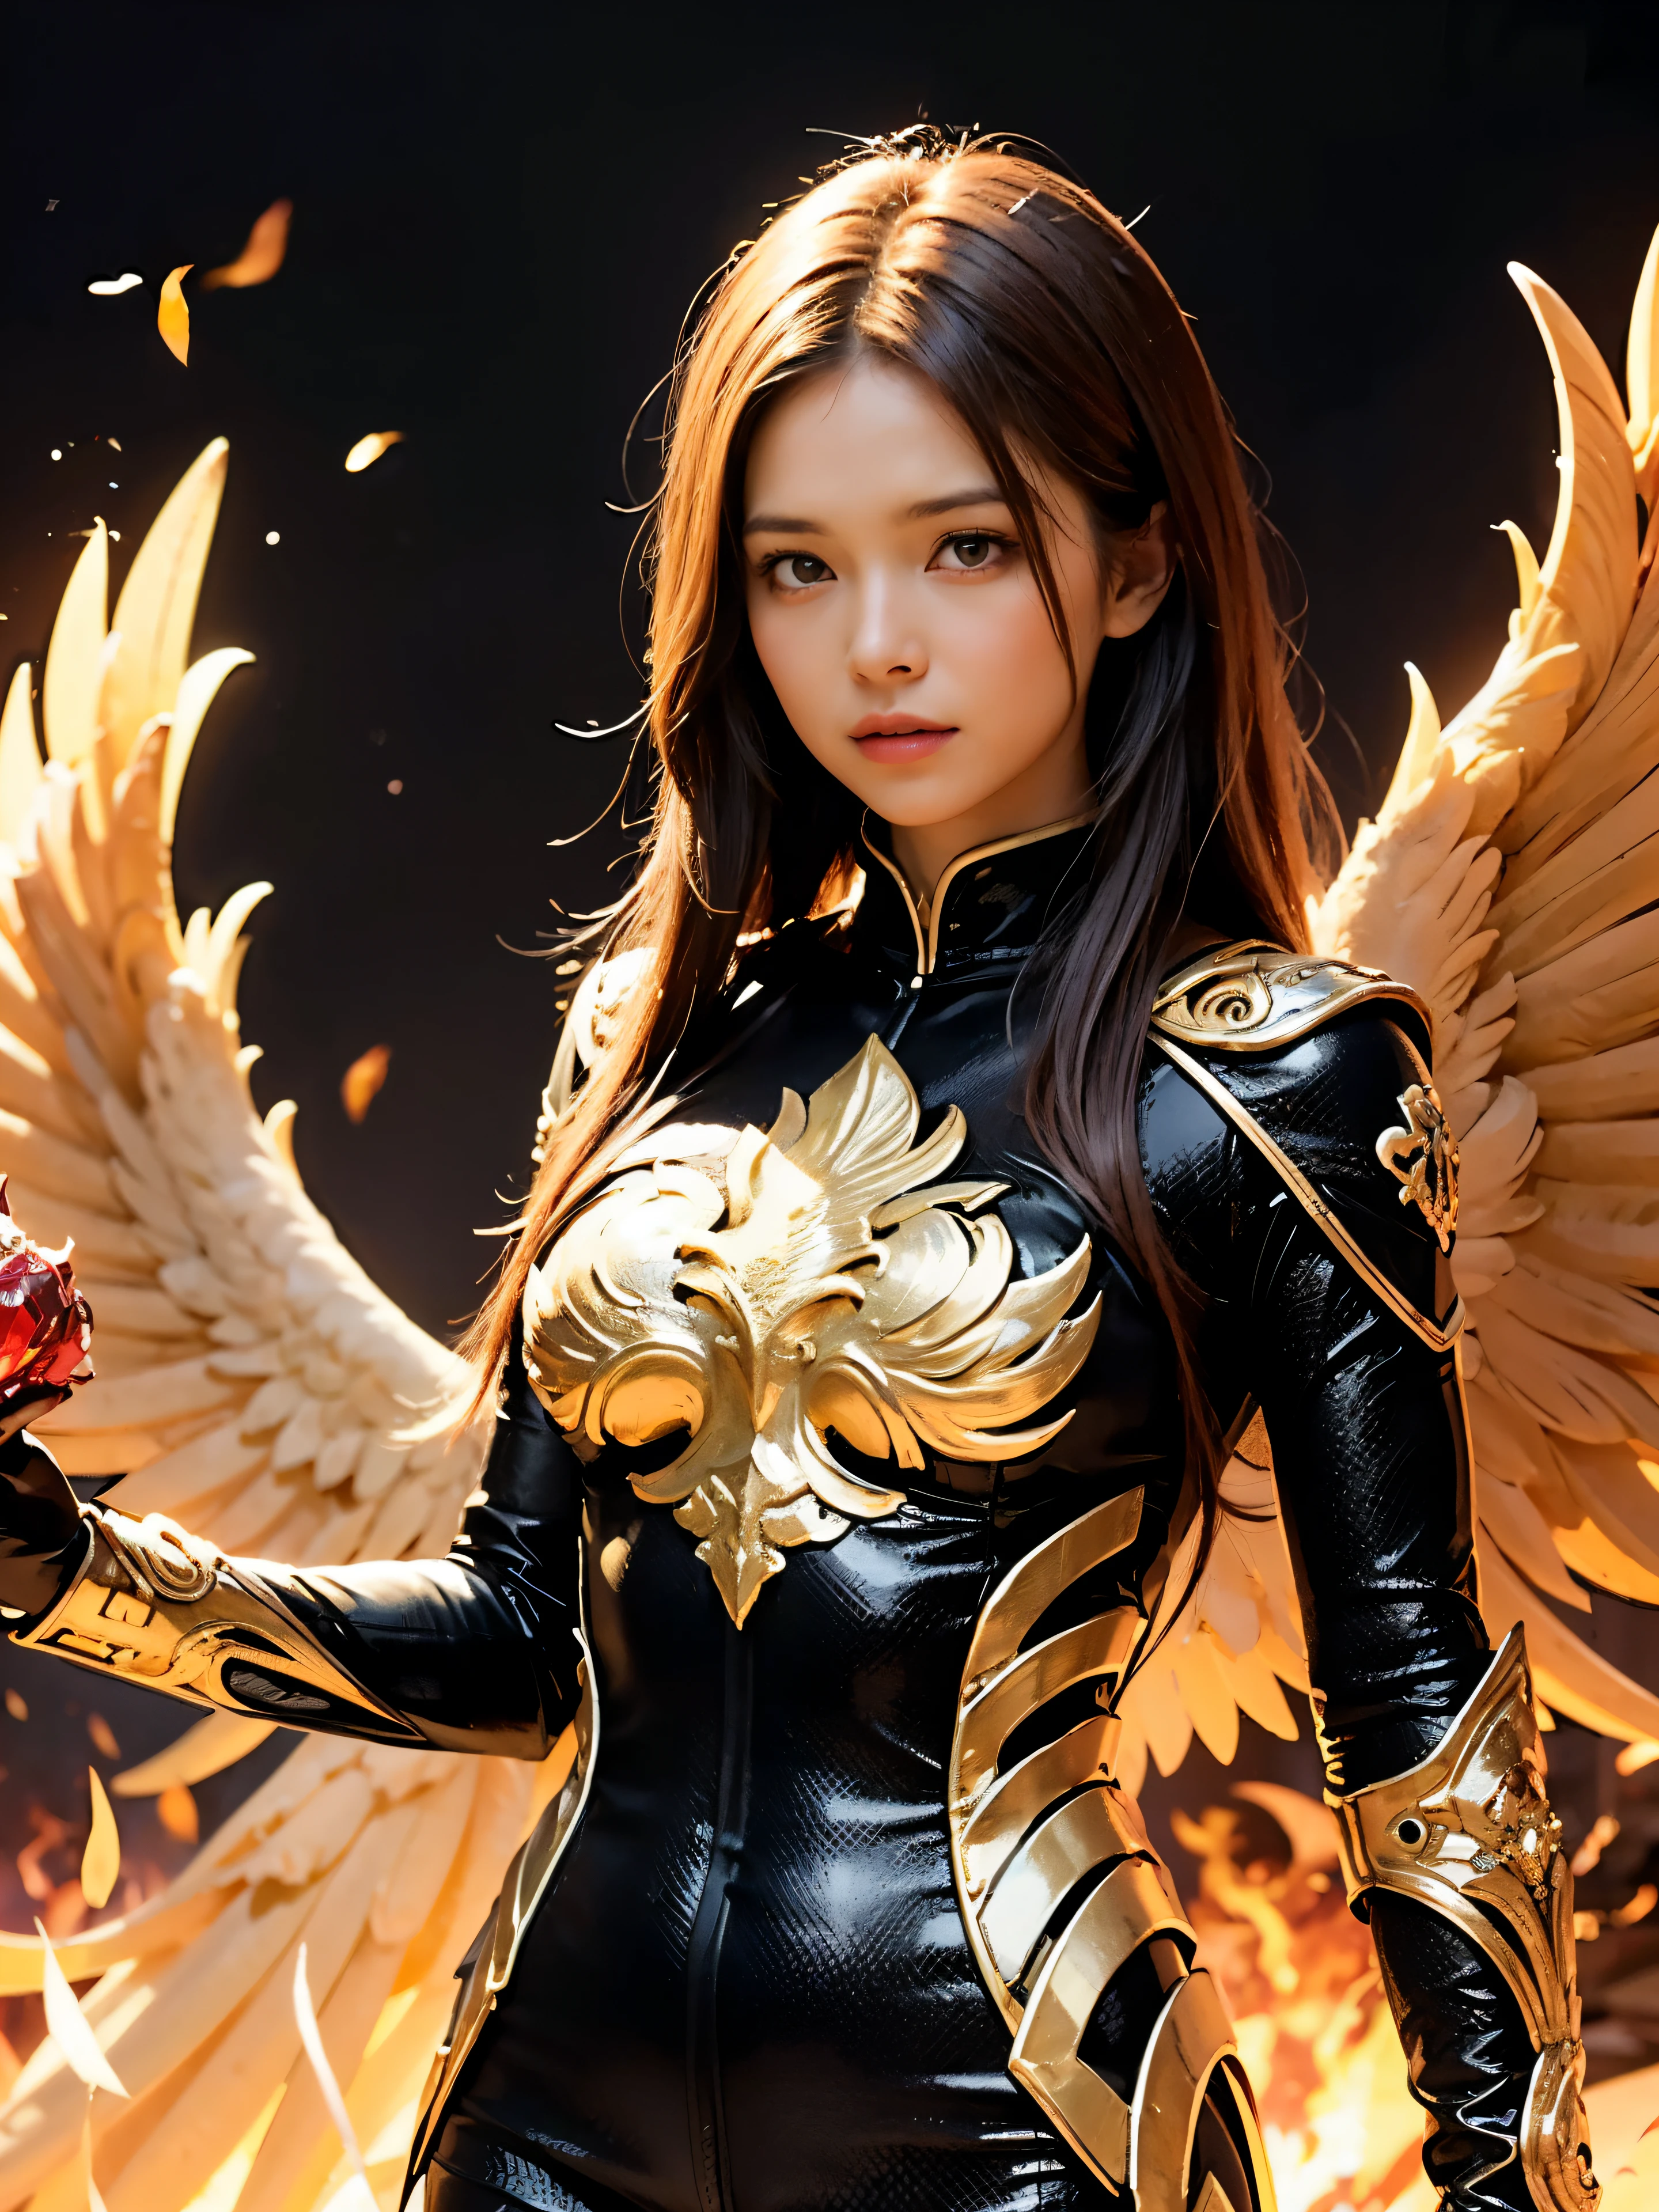 High-quality images,(masutepiece:1.4), (very intricate:1.2)>,  (Upper body:1.3), 1girl in,Whewic Keeper, Fireproof suit with golden phoenix emblem, Fire cage with obsidian bar, Phoenix nest with shimmering golden feathers, Talon Grove to deal with the phoenix, Burning rubies to feed phoenixes,